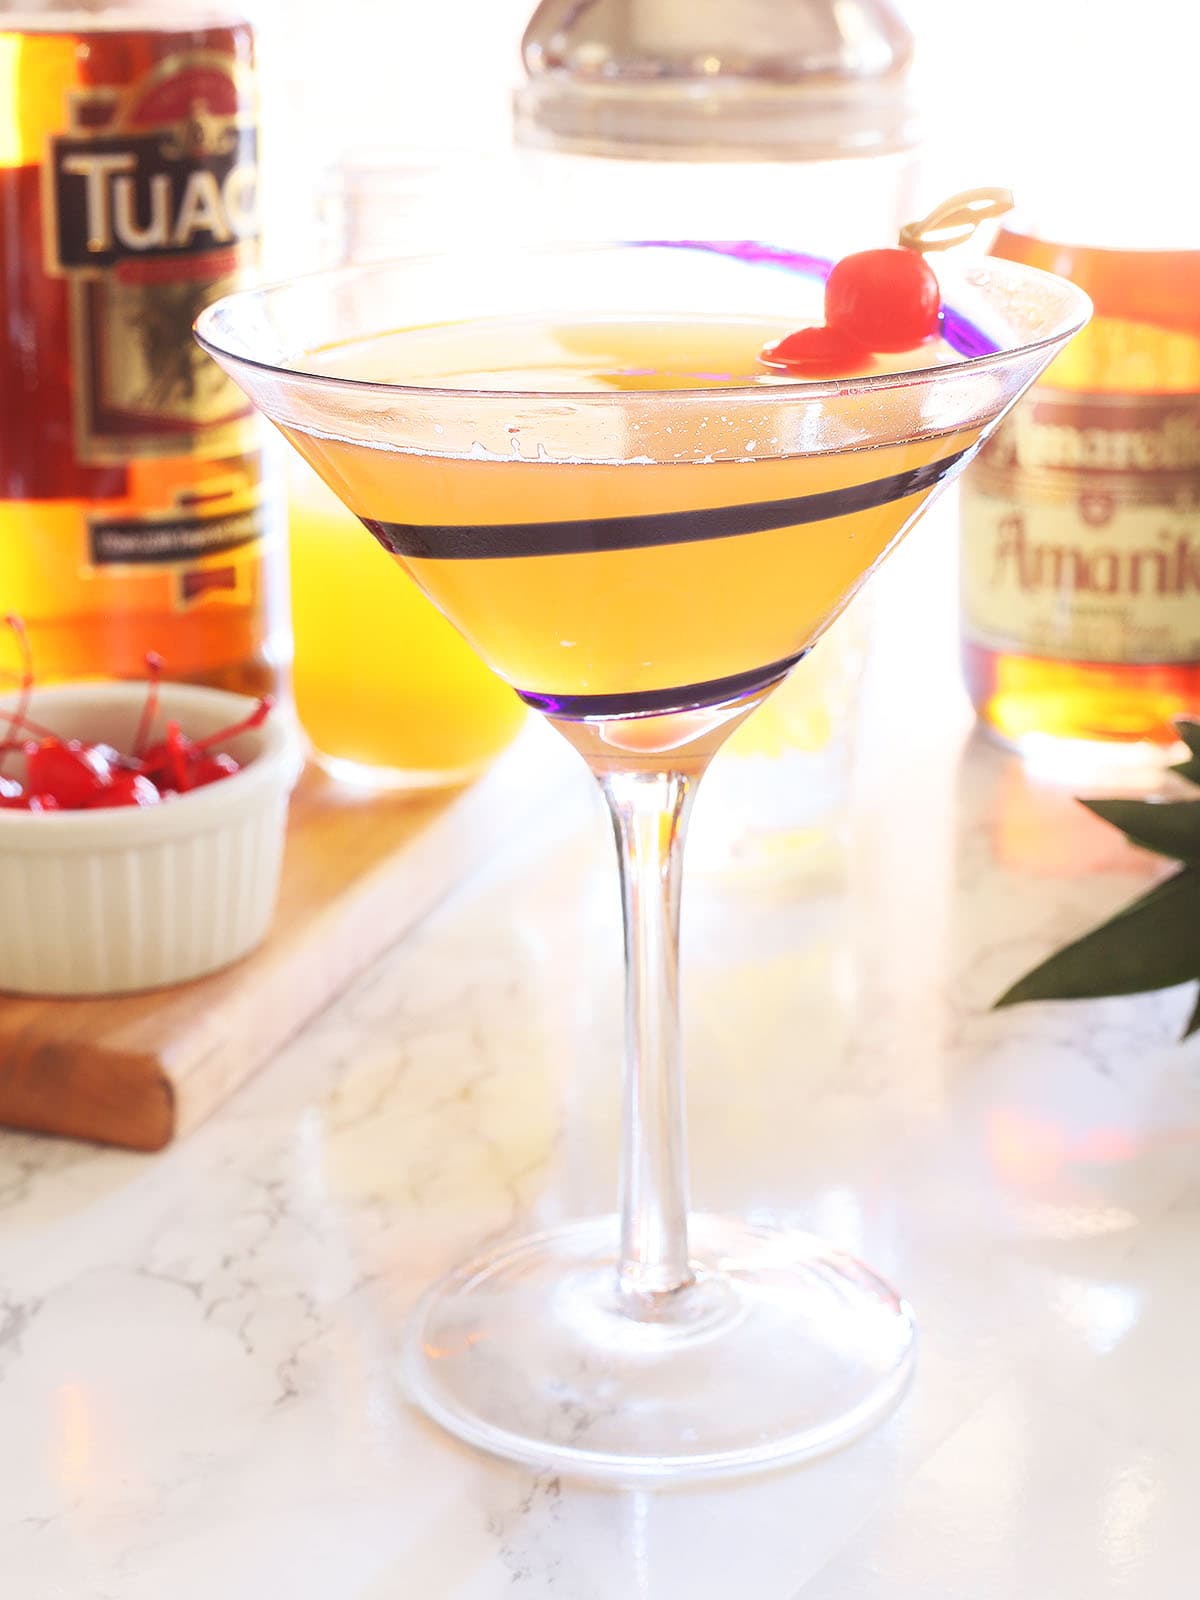 Tuaca pineapple martini garnished with two cherries with martini ingredients in the background